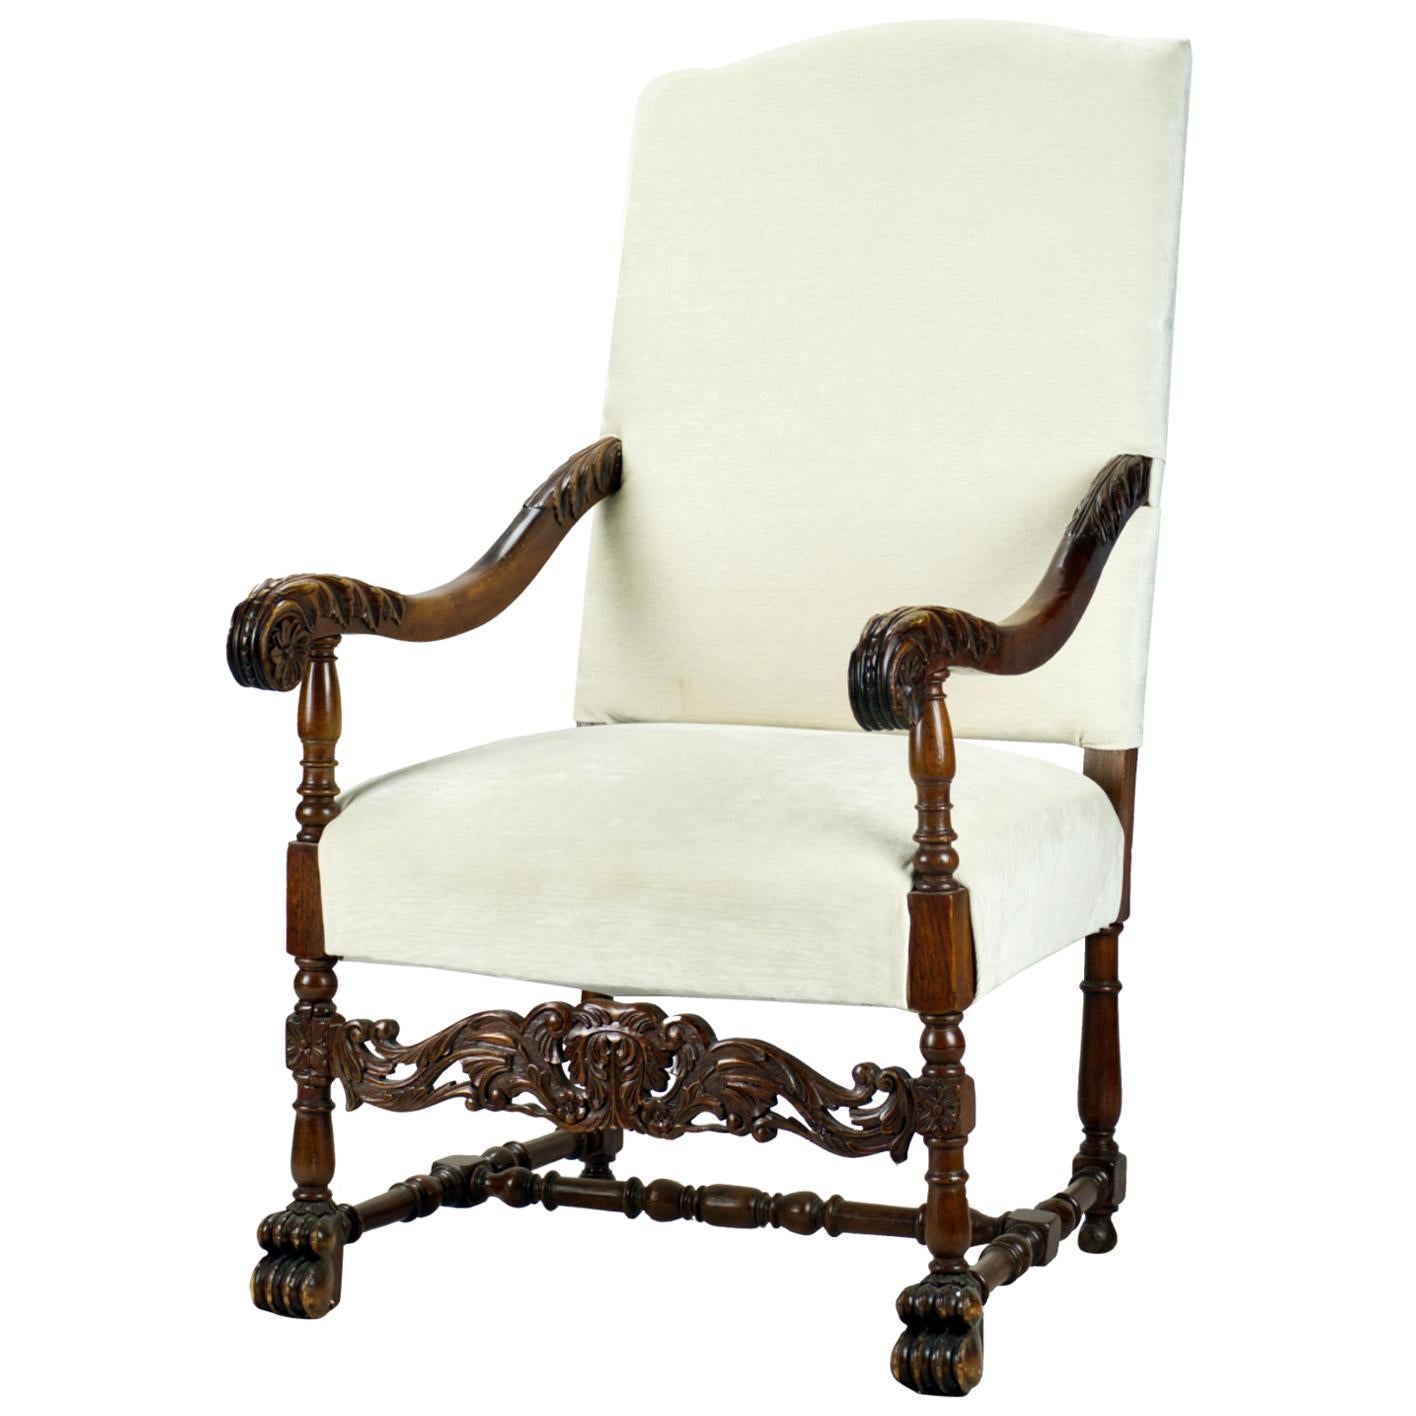 Antique Hand Carved Louis XIII Highback Armchair, 19th Century